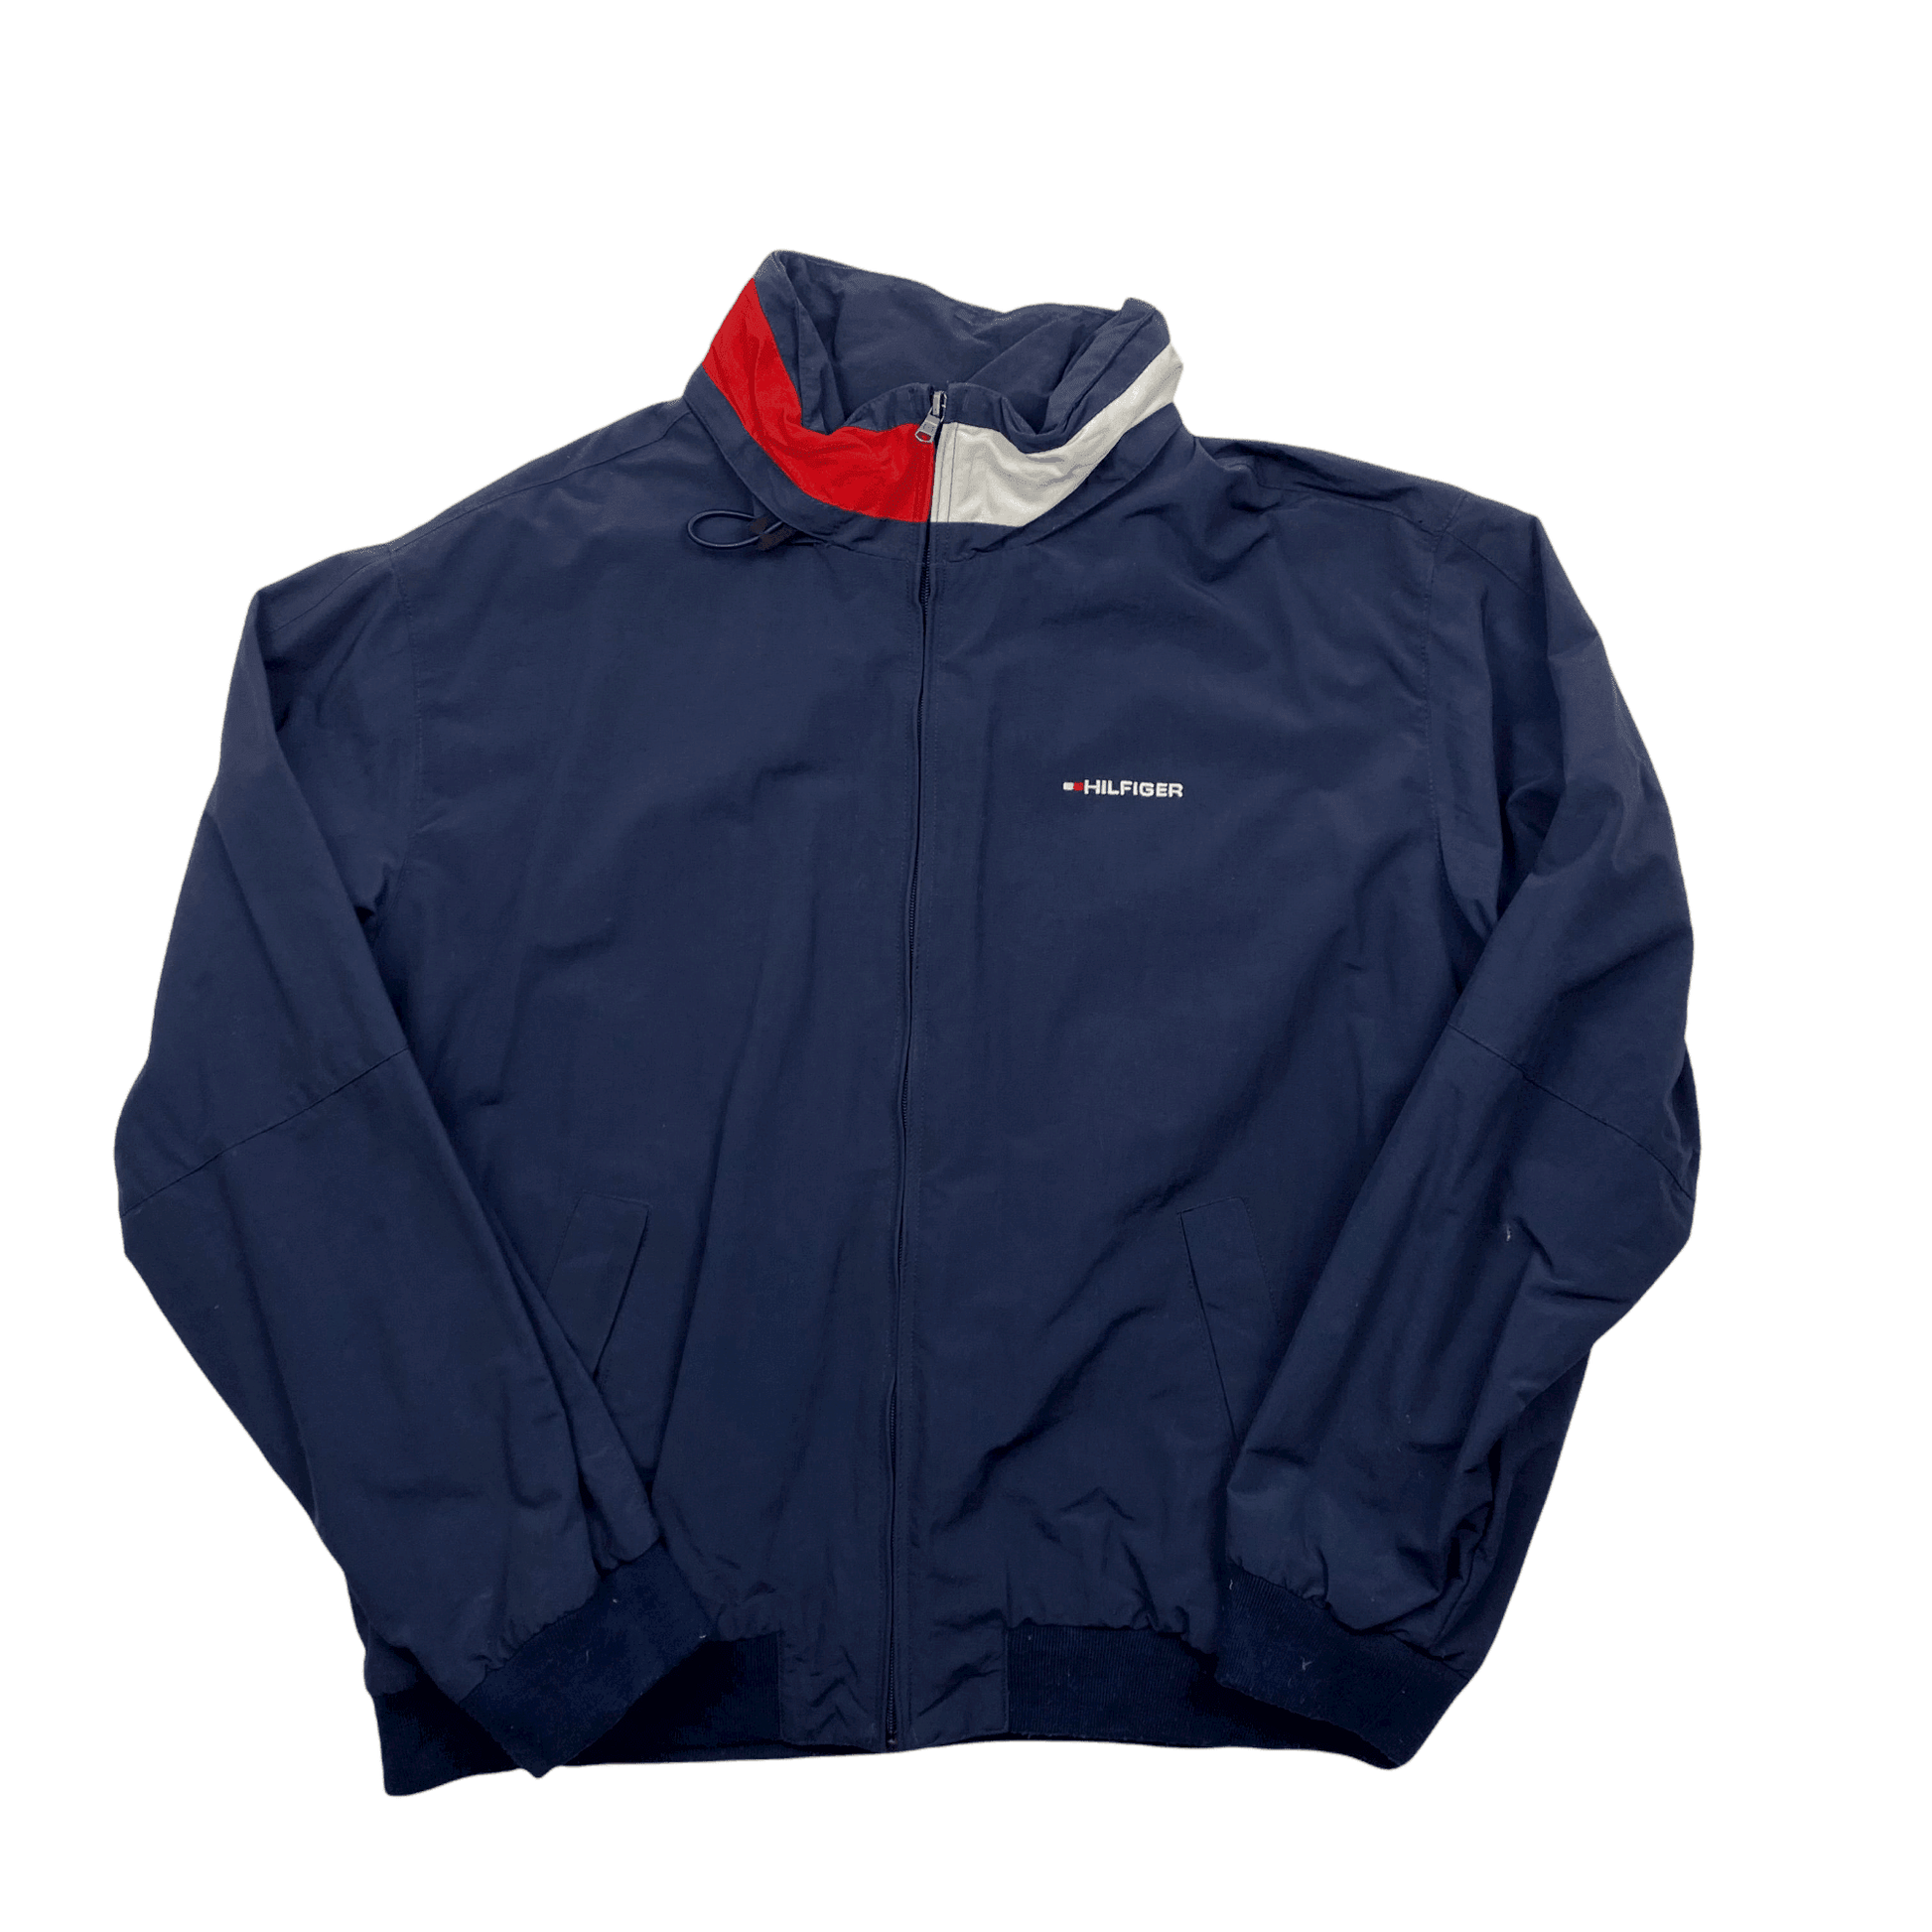 Vintage Navy Blue Tommy Hilfiger Spell-Out Sailing Jacket/ Coat - Extra Large - The Streetwear Studio